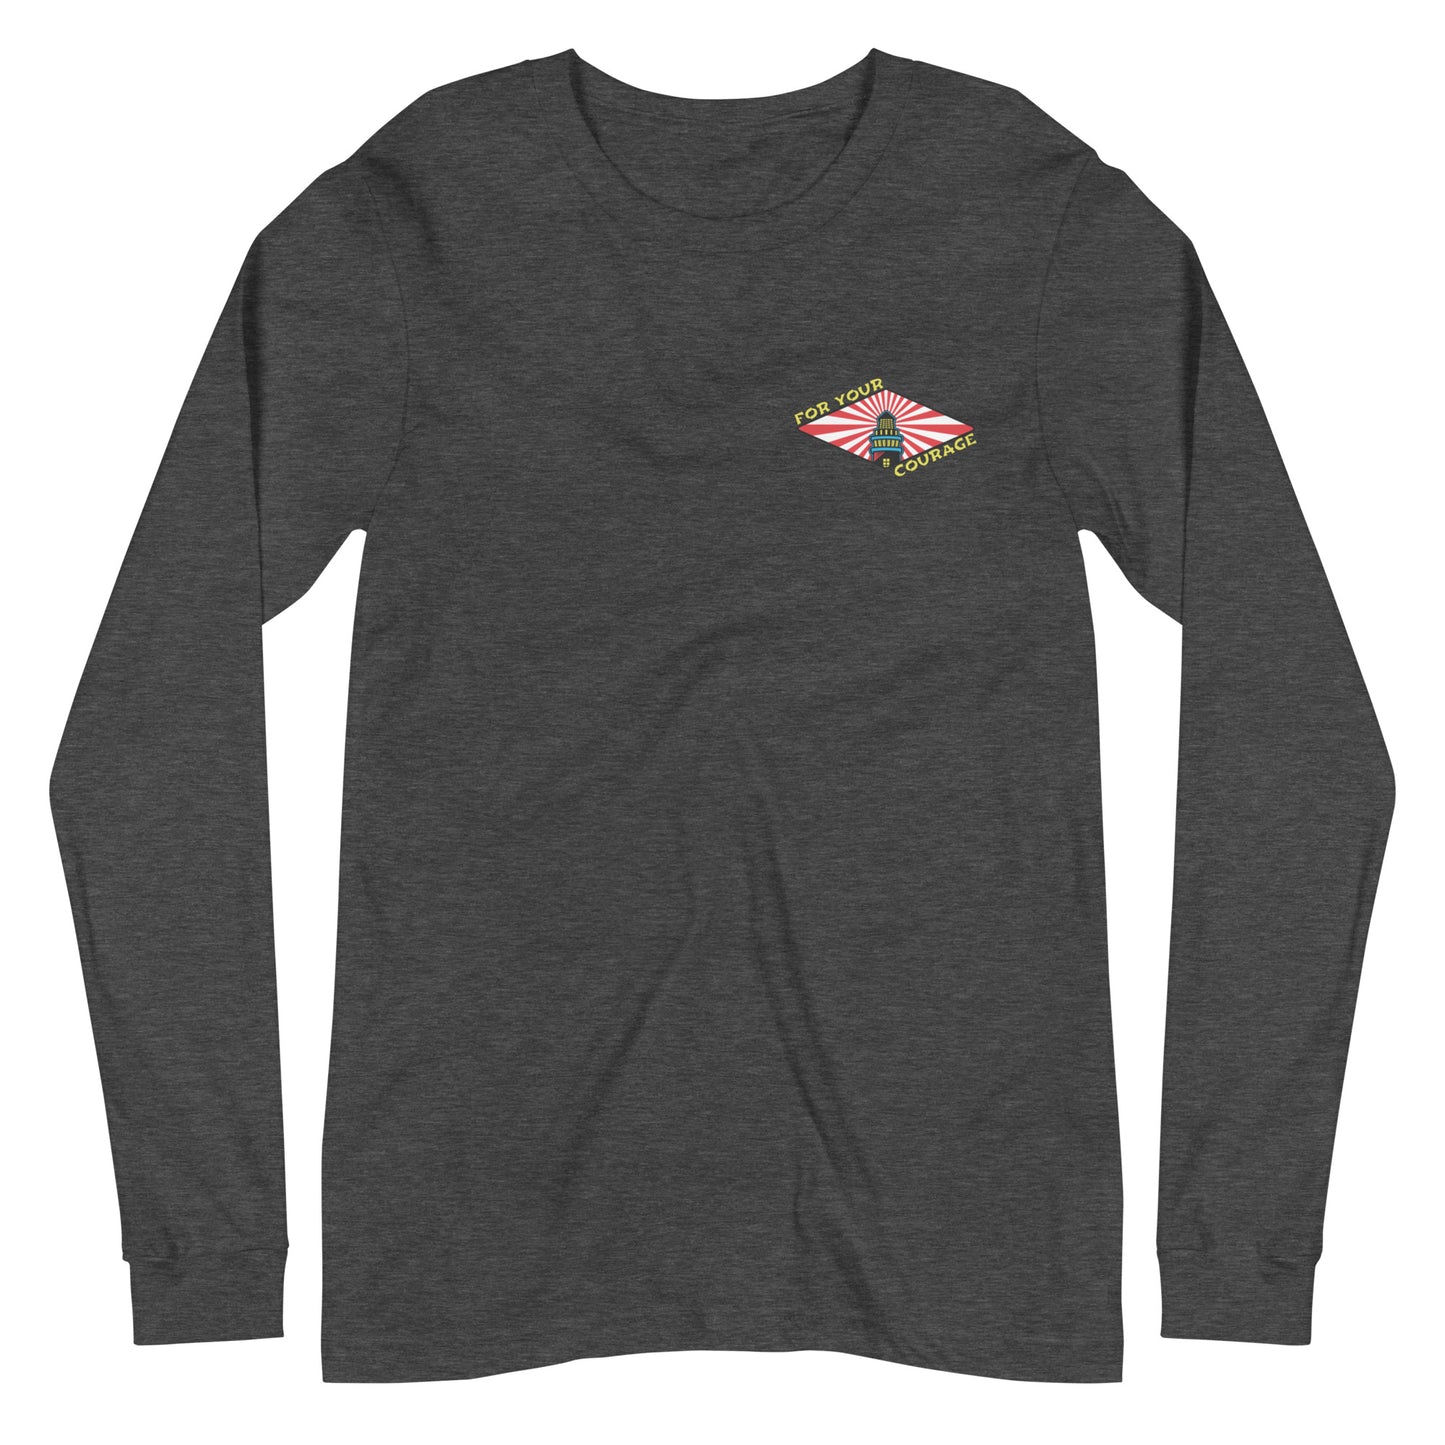 Let Light Shine - Long Sleeve - For Your Courage